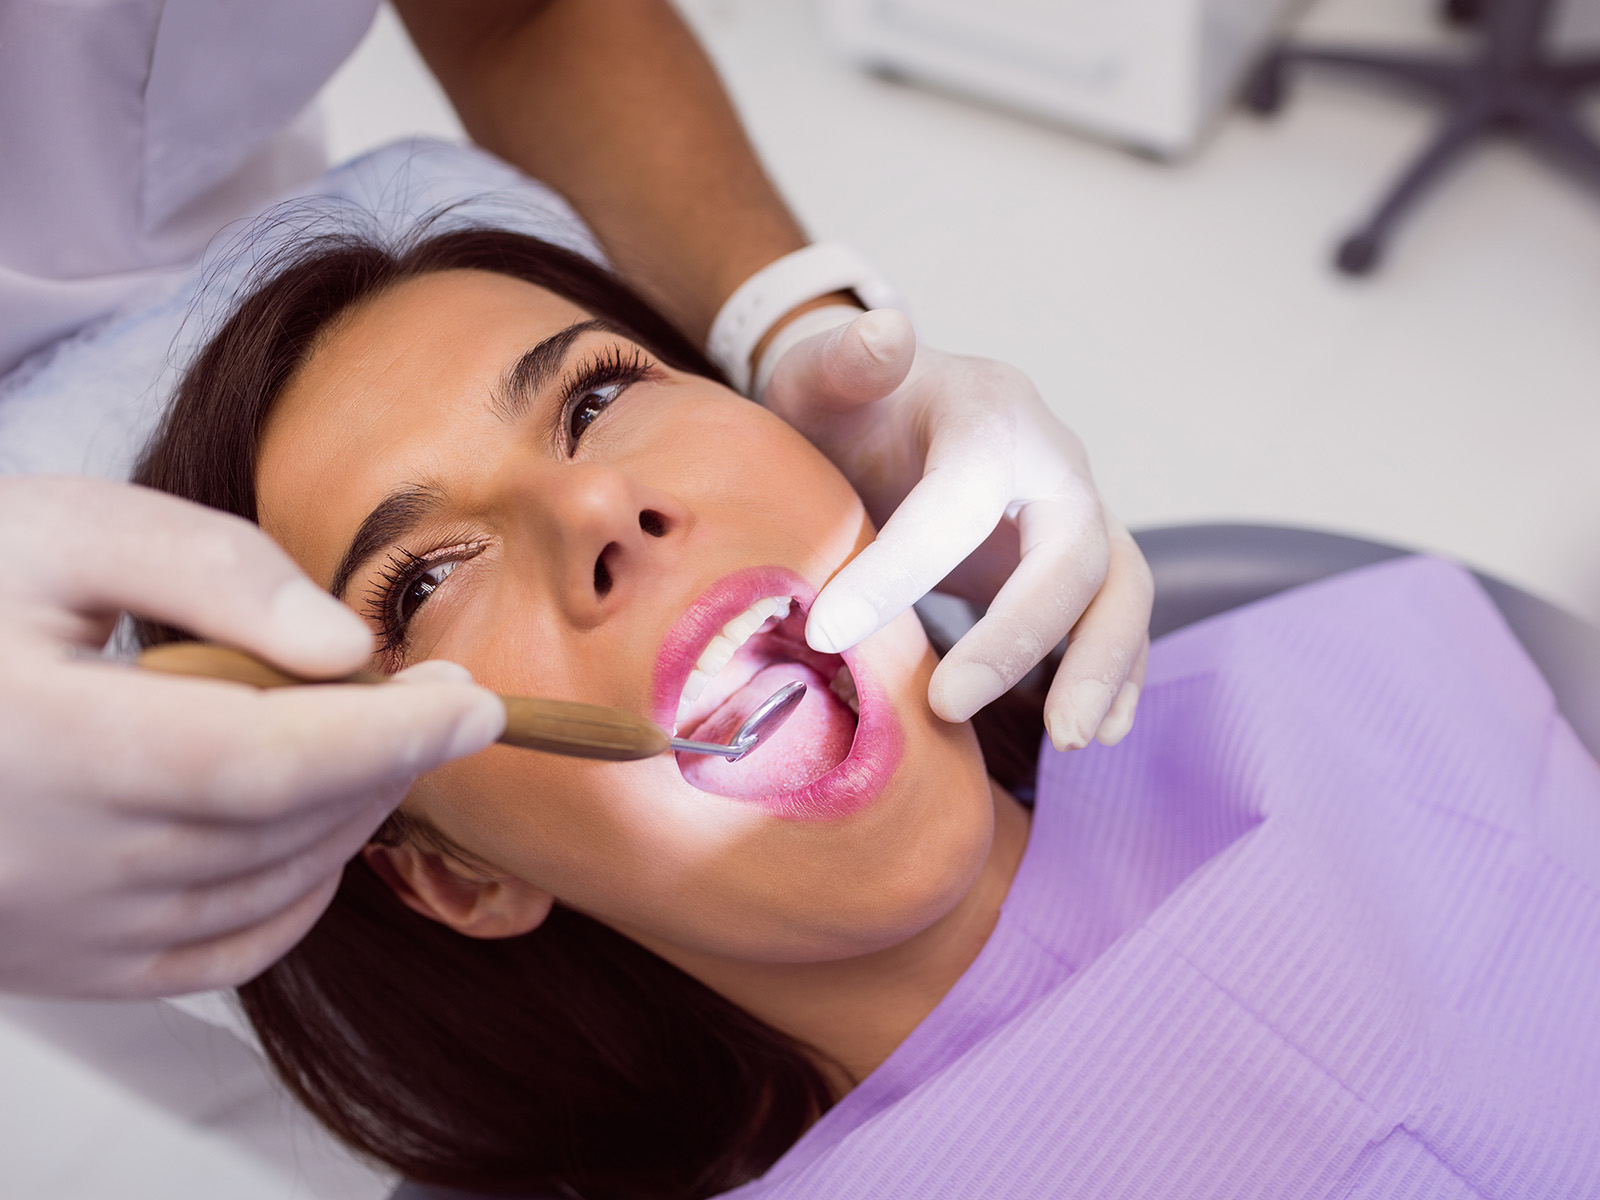 What Are The Pros And Cons of Dental Fluoride Treatments?